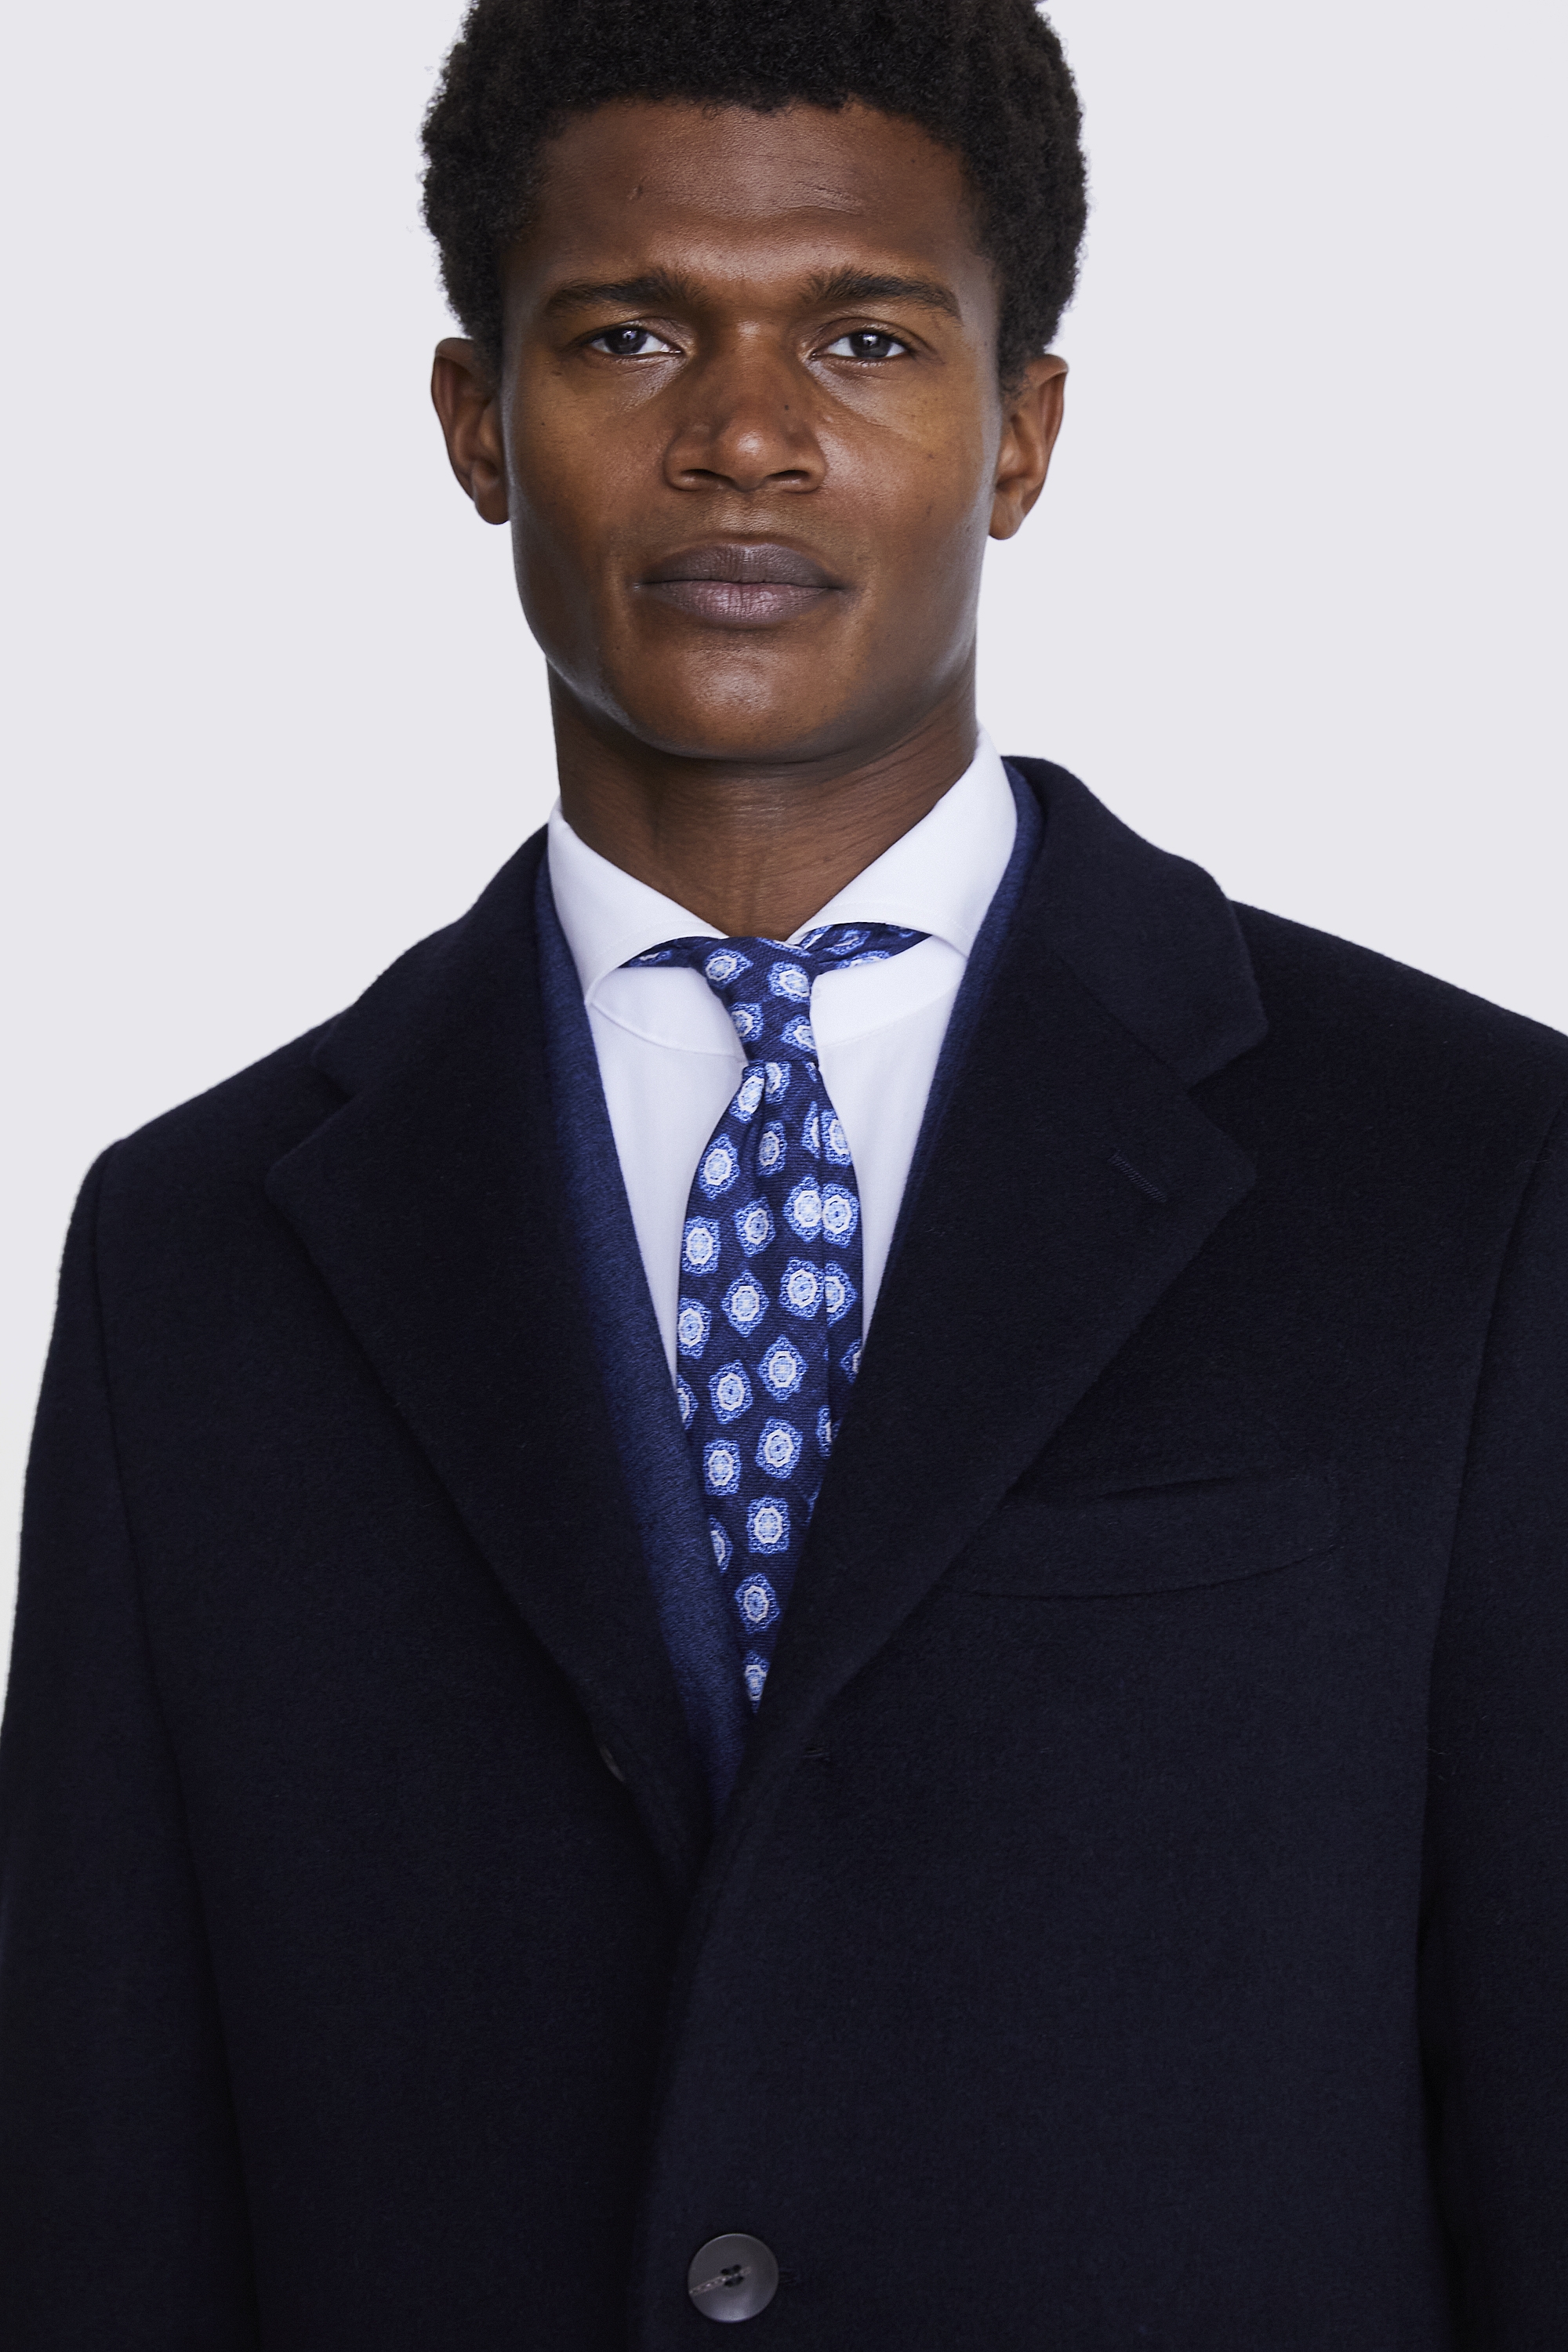 Navy Wool Cashmere Blend Overcoat | Buy Online at Moss